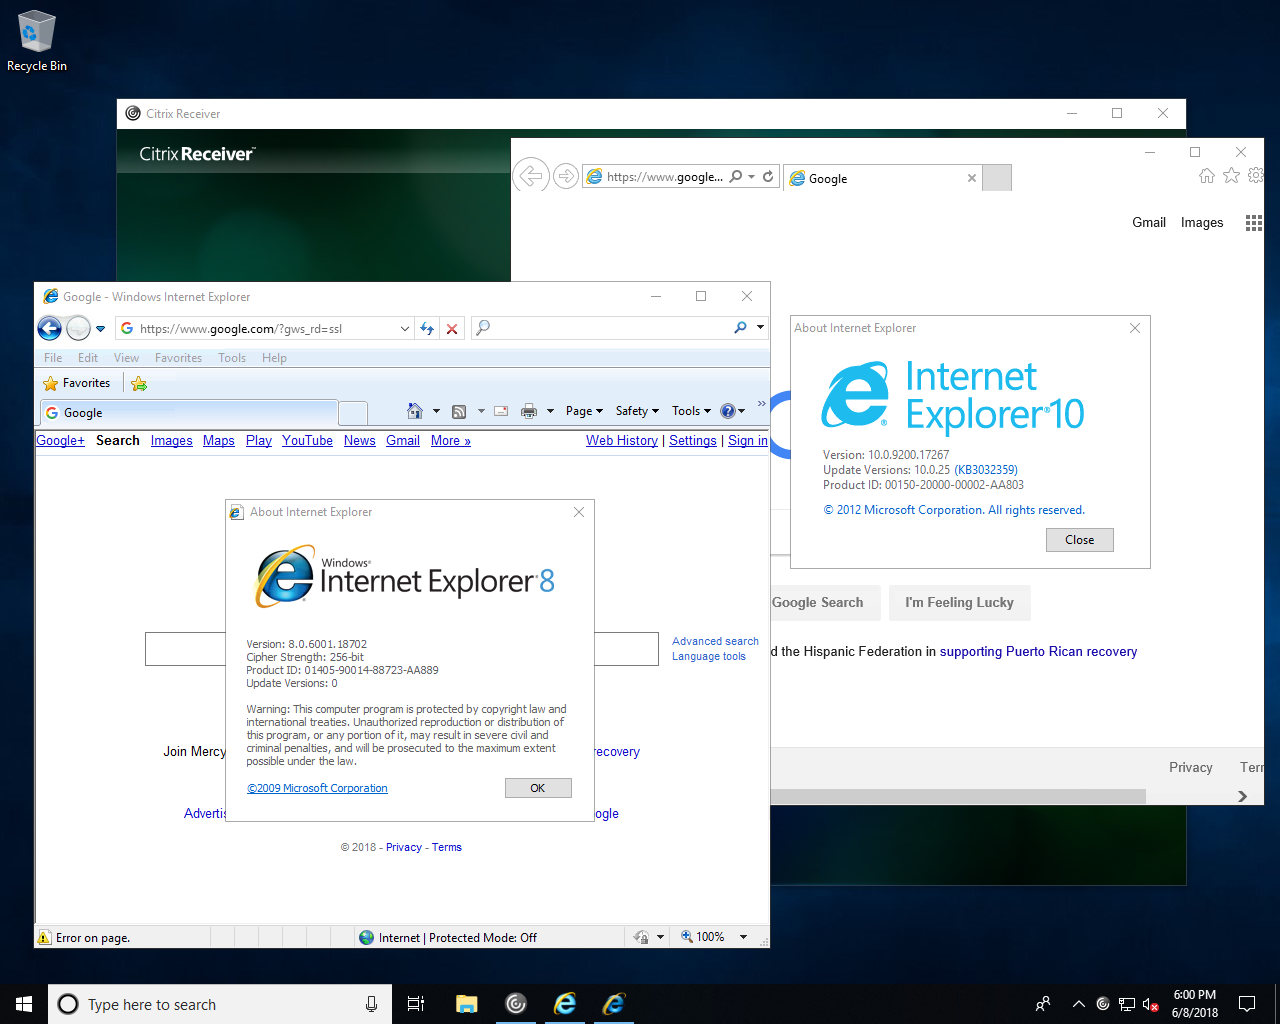 Citrix apps receiver ie side-by-side IE